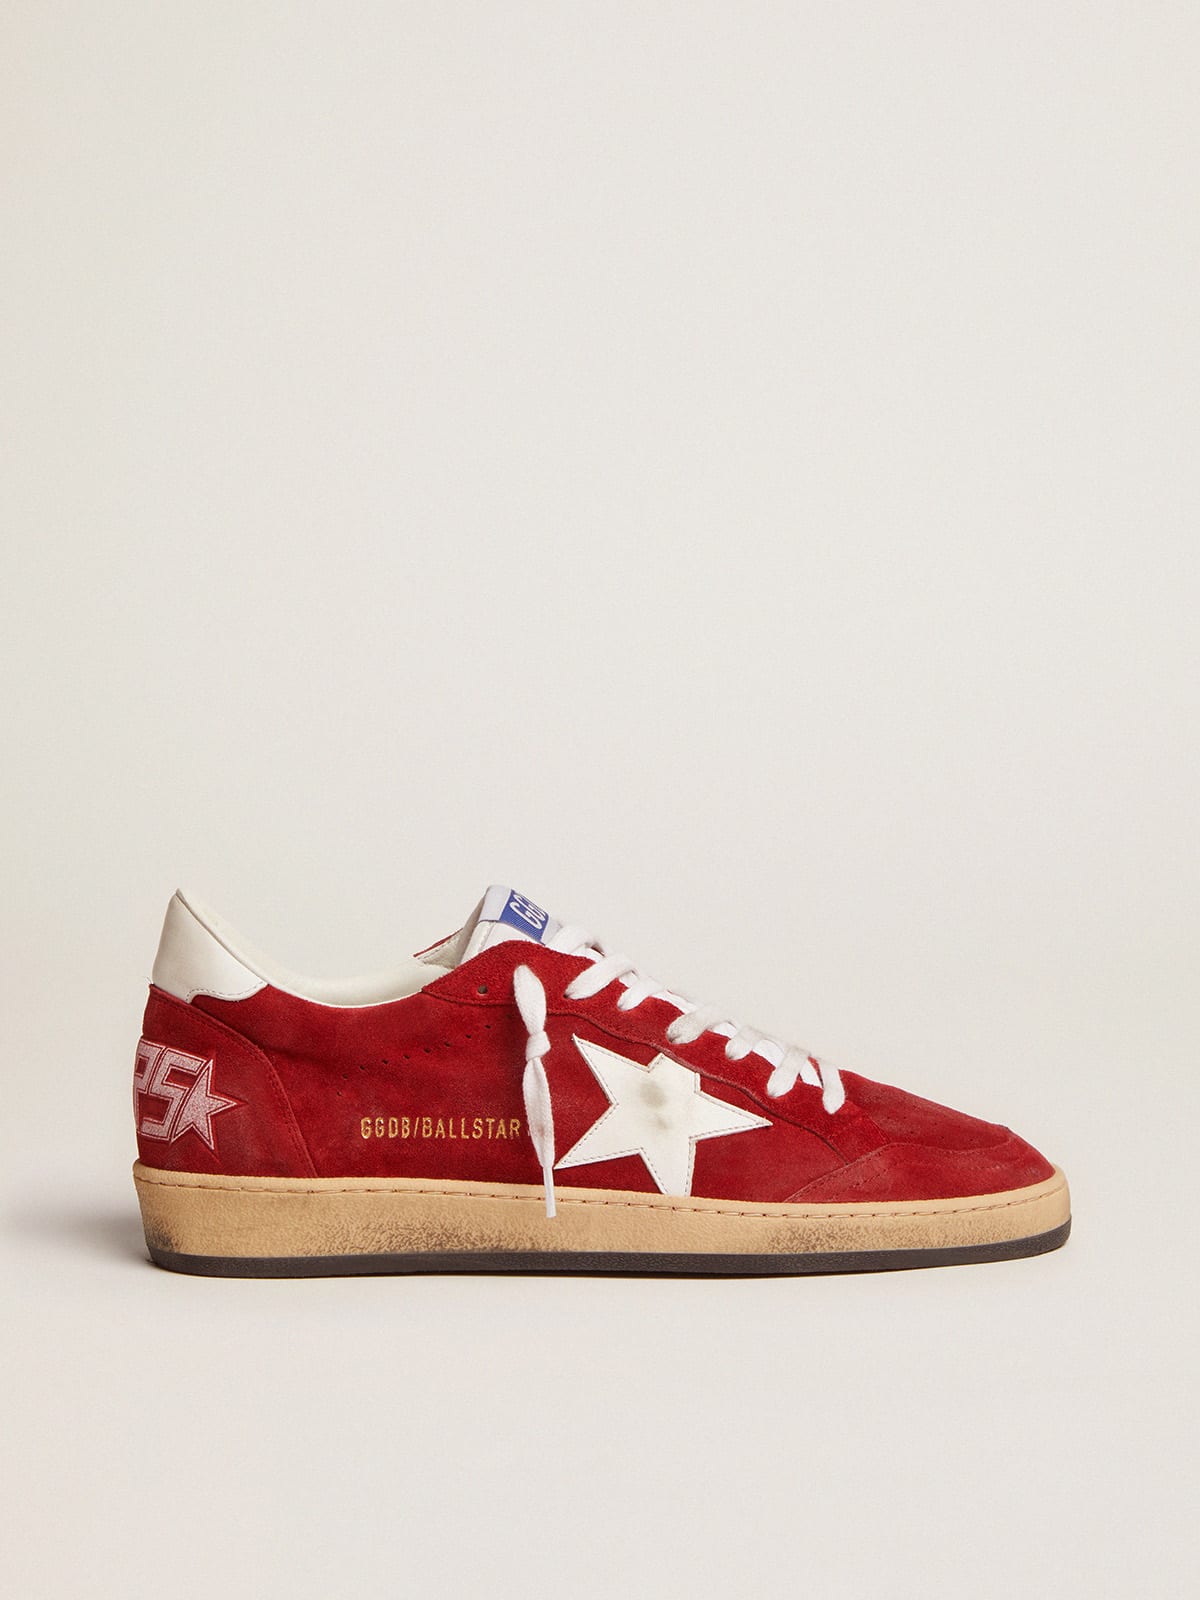 Women's Ball Star in red suede with white leather star